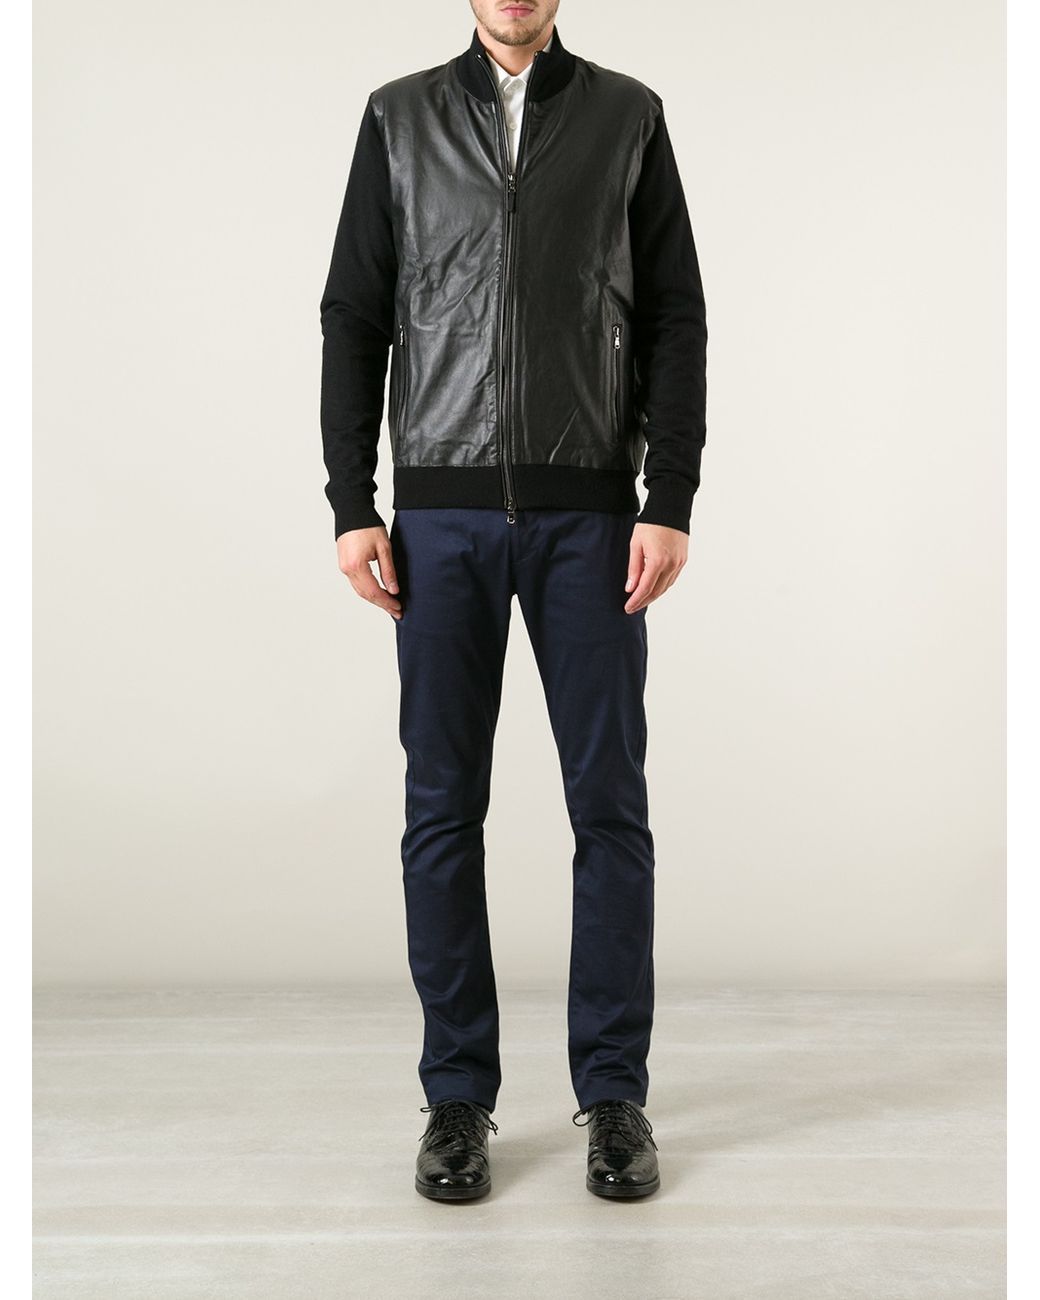 Michael Kors Leather Front Cardigan in Black for Men | Lyst